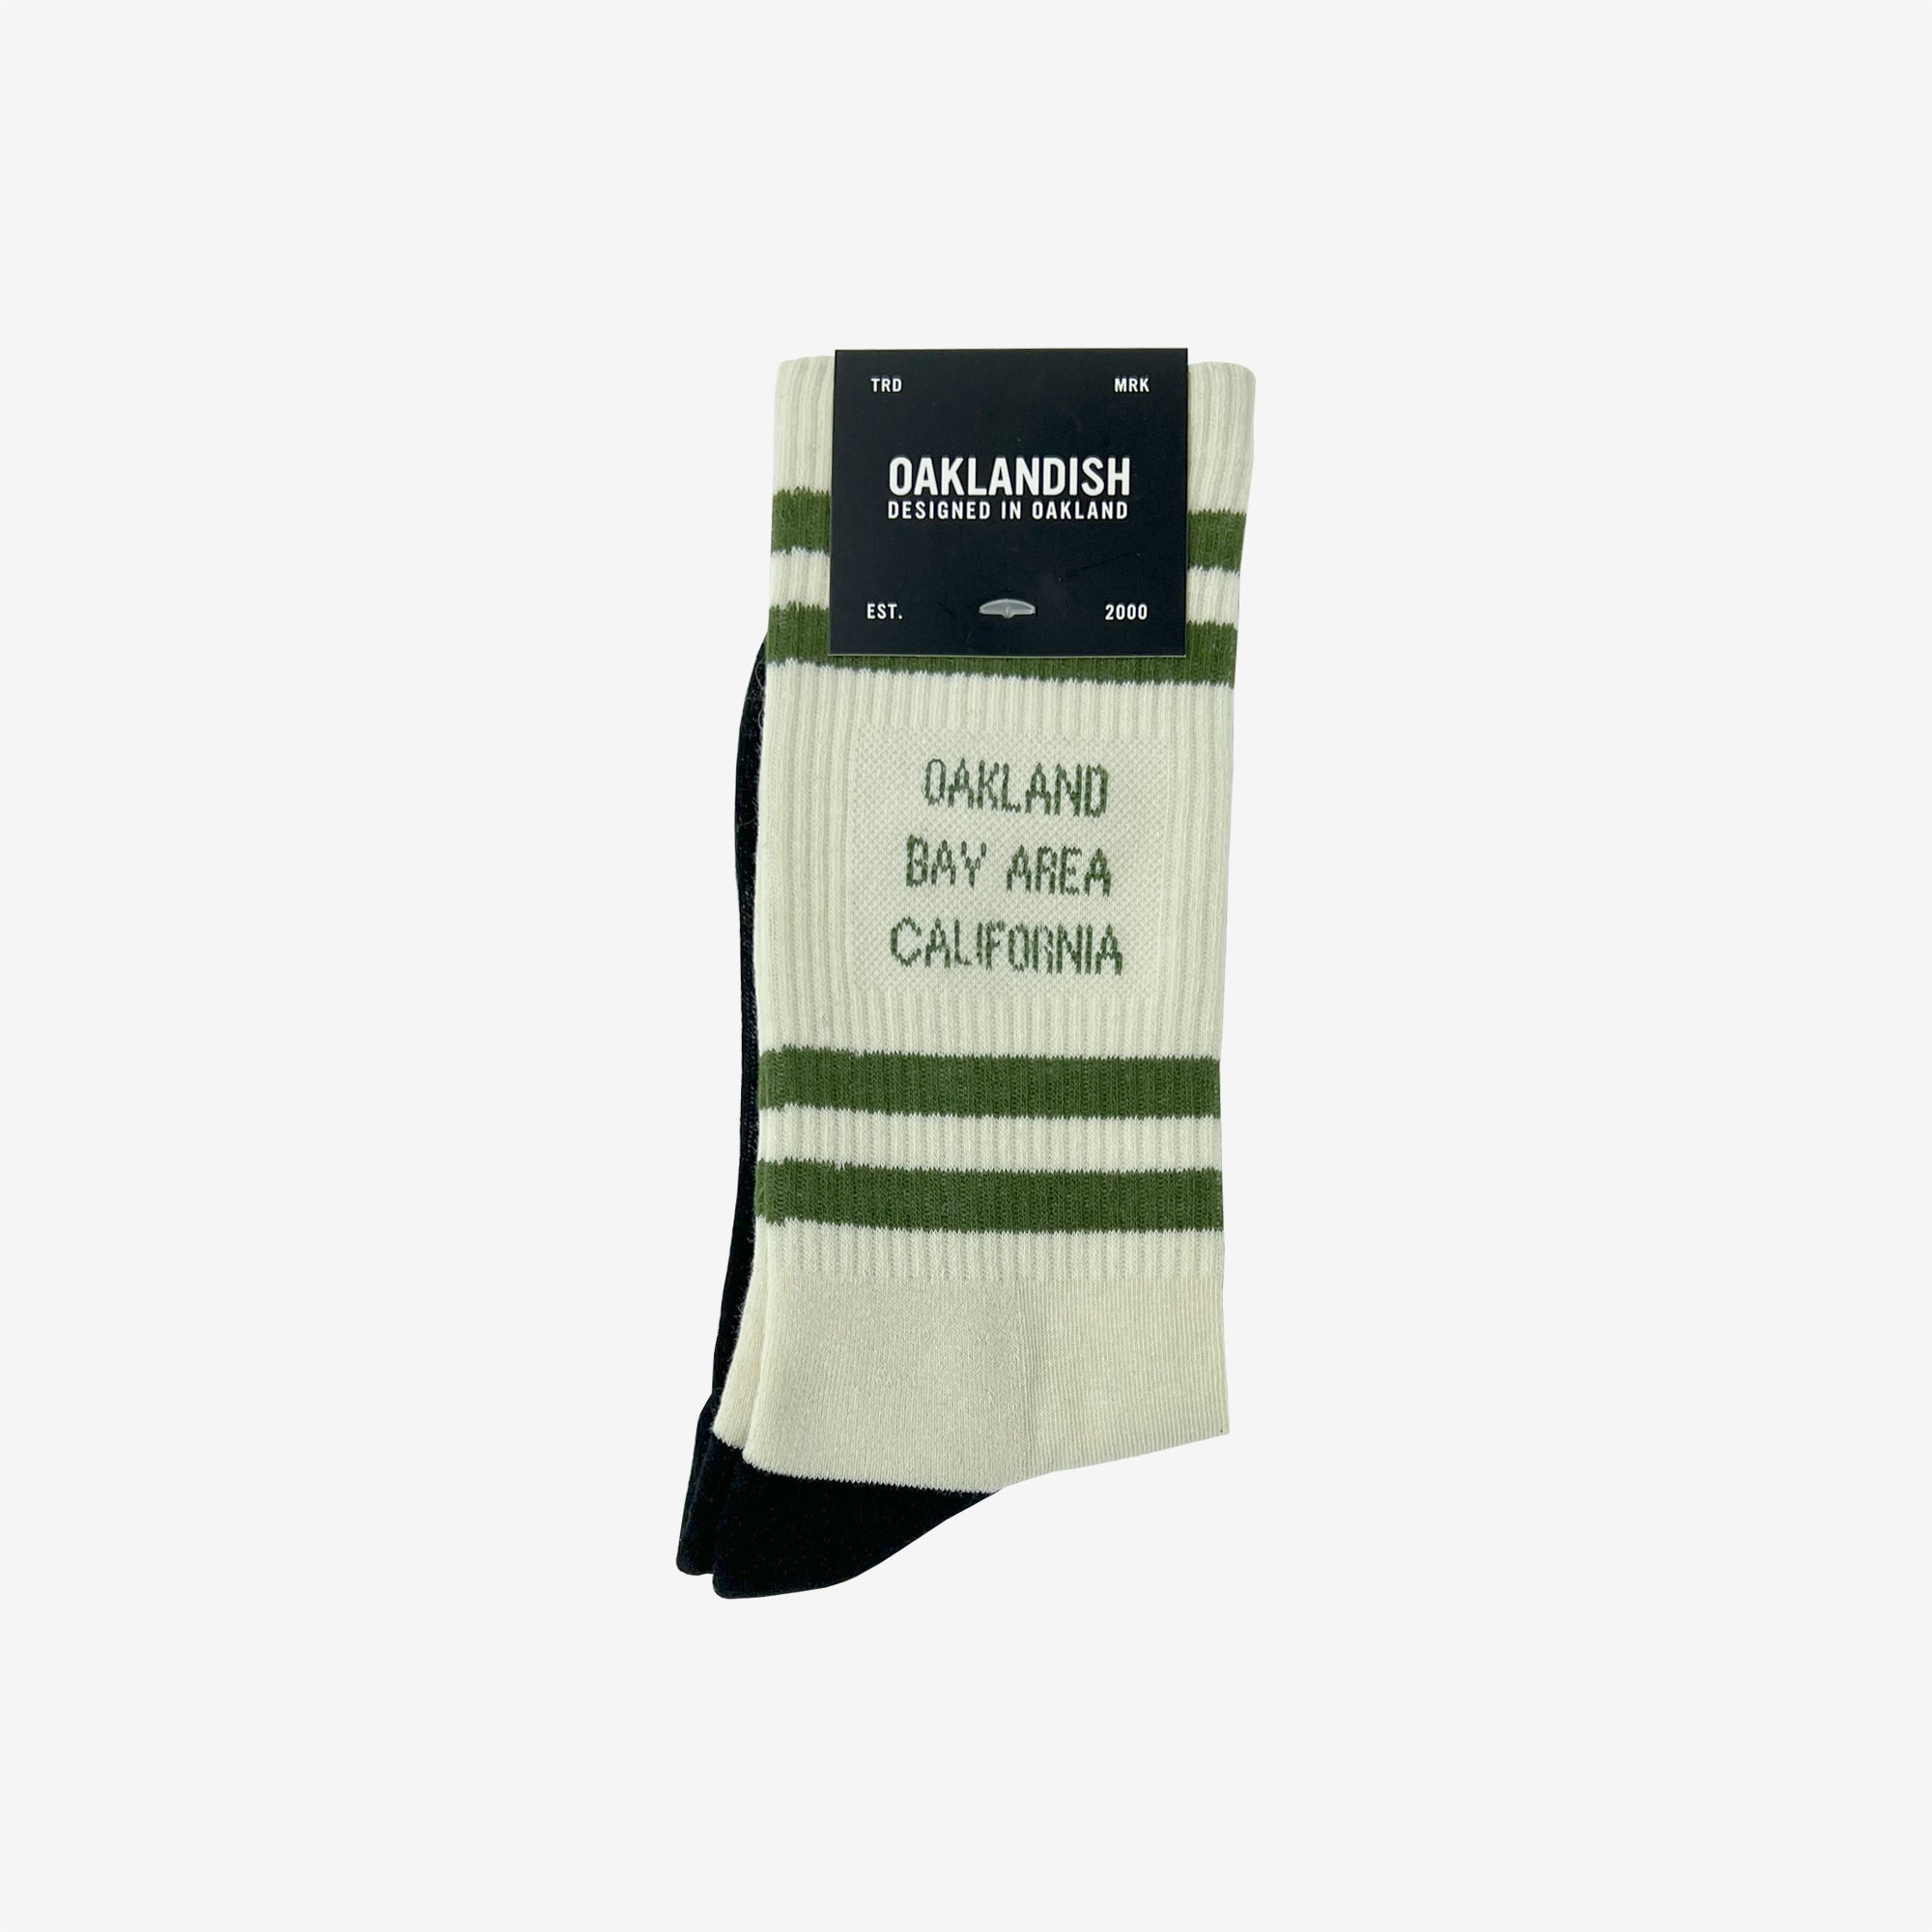 White socks with Oakland Bay Area California in capital letters folded in Oaklandish retail packaging.